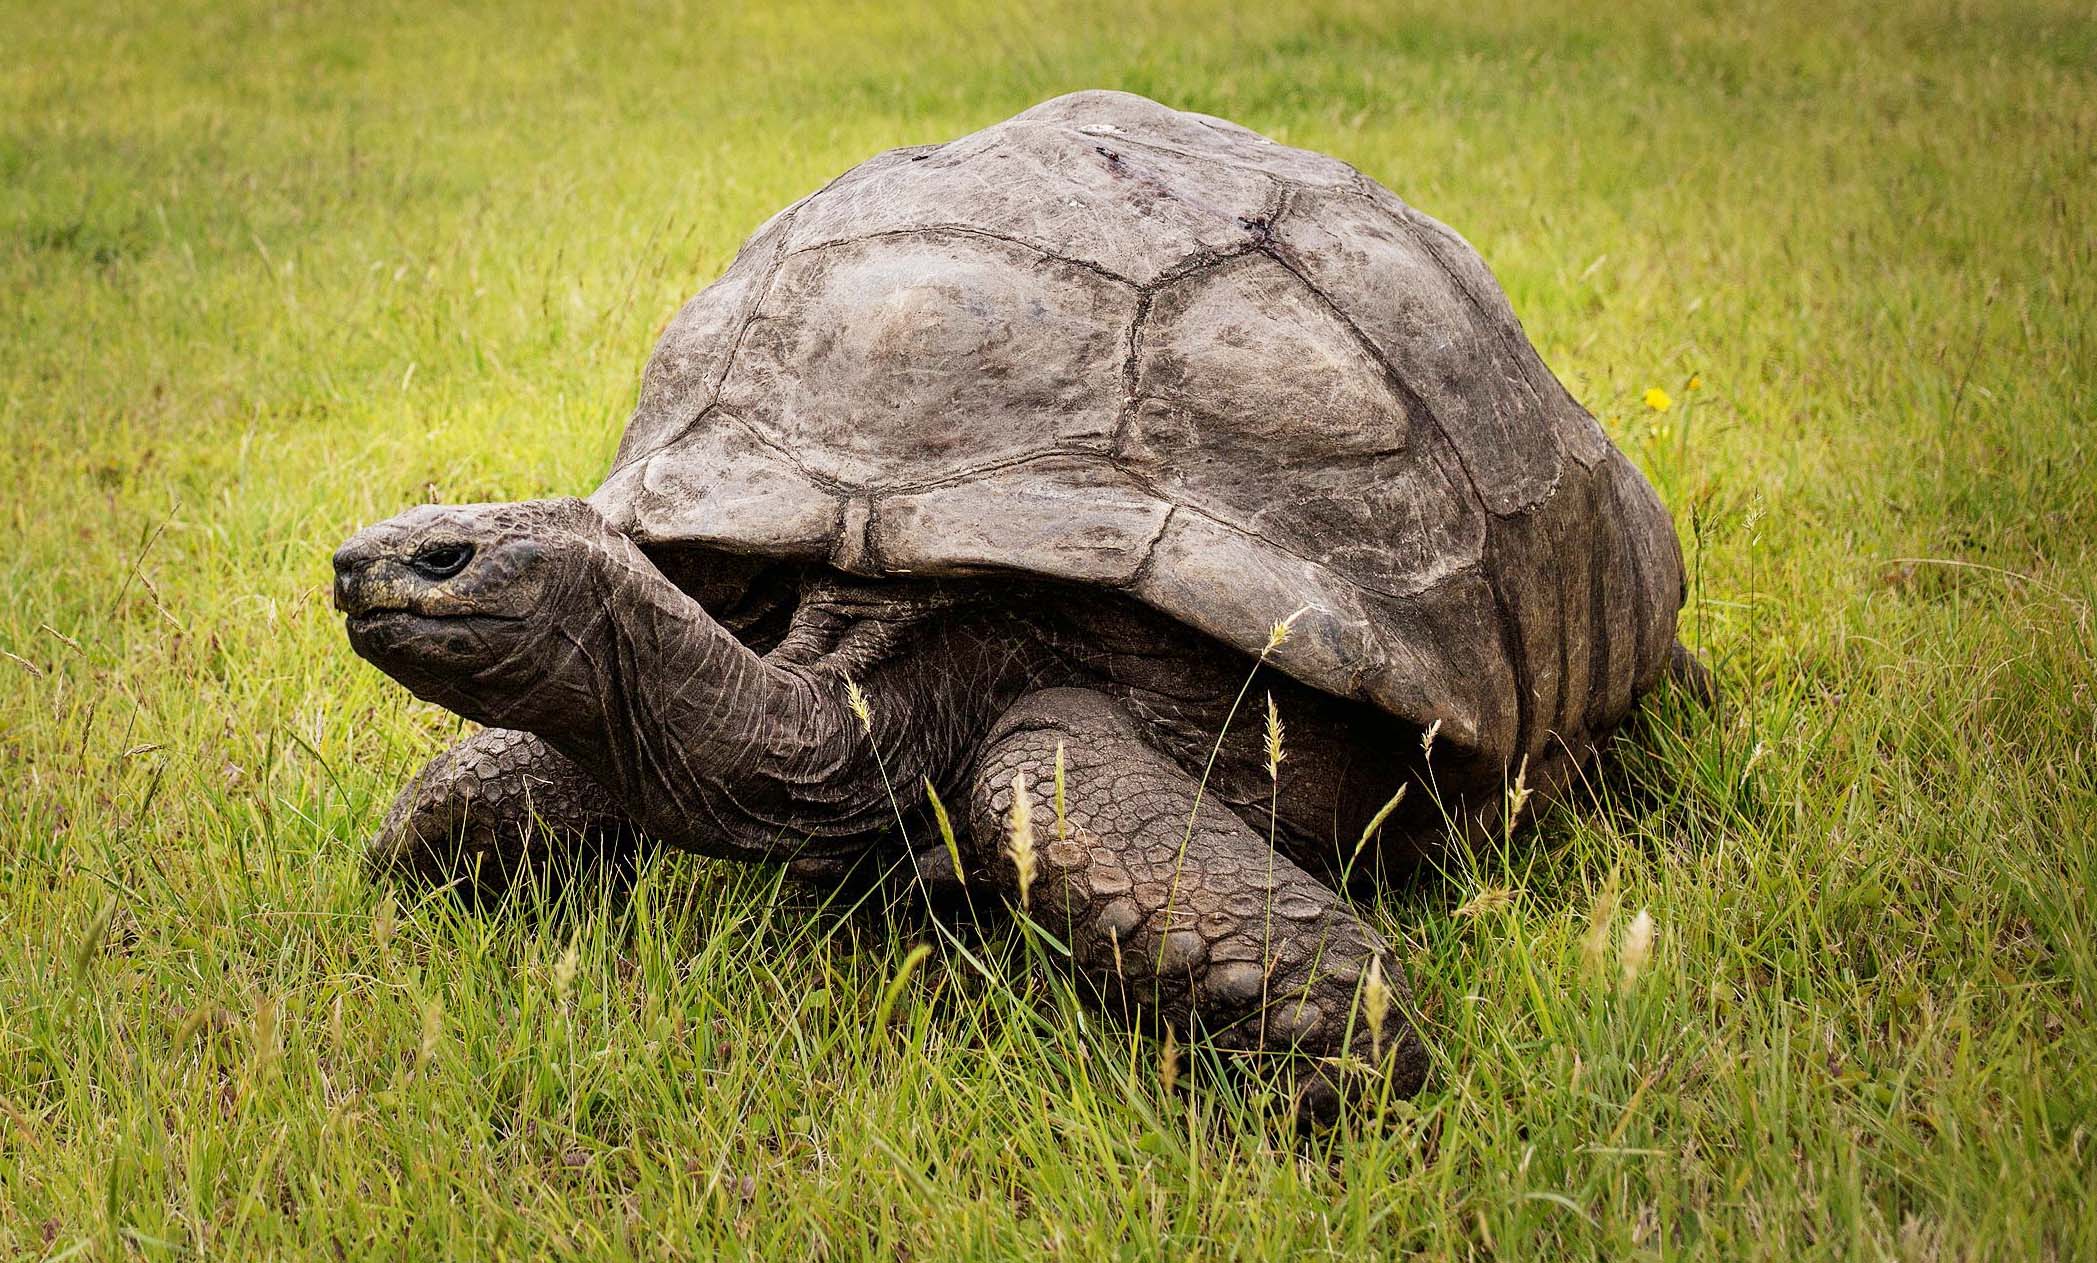 Jonathan the Tortoise Celebrates 188th Birthday, Is Said to Be the Oldest  Land Animal on Earth